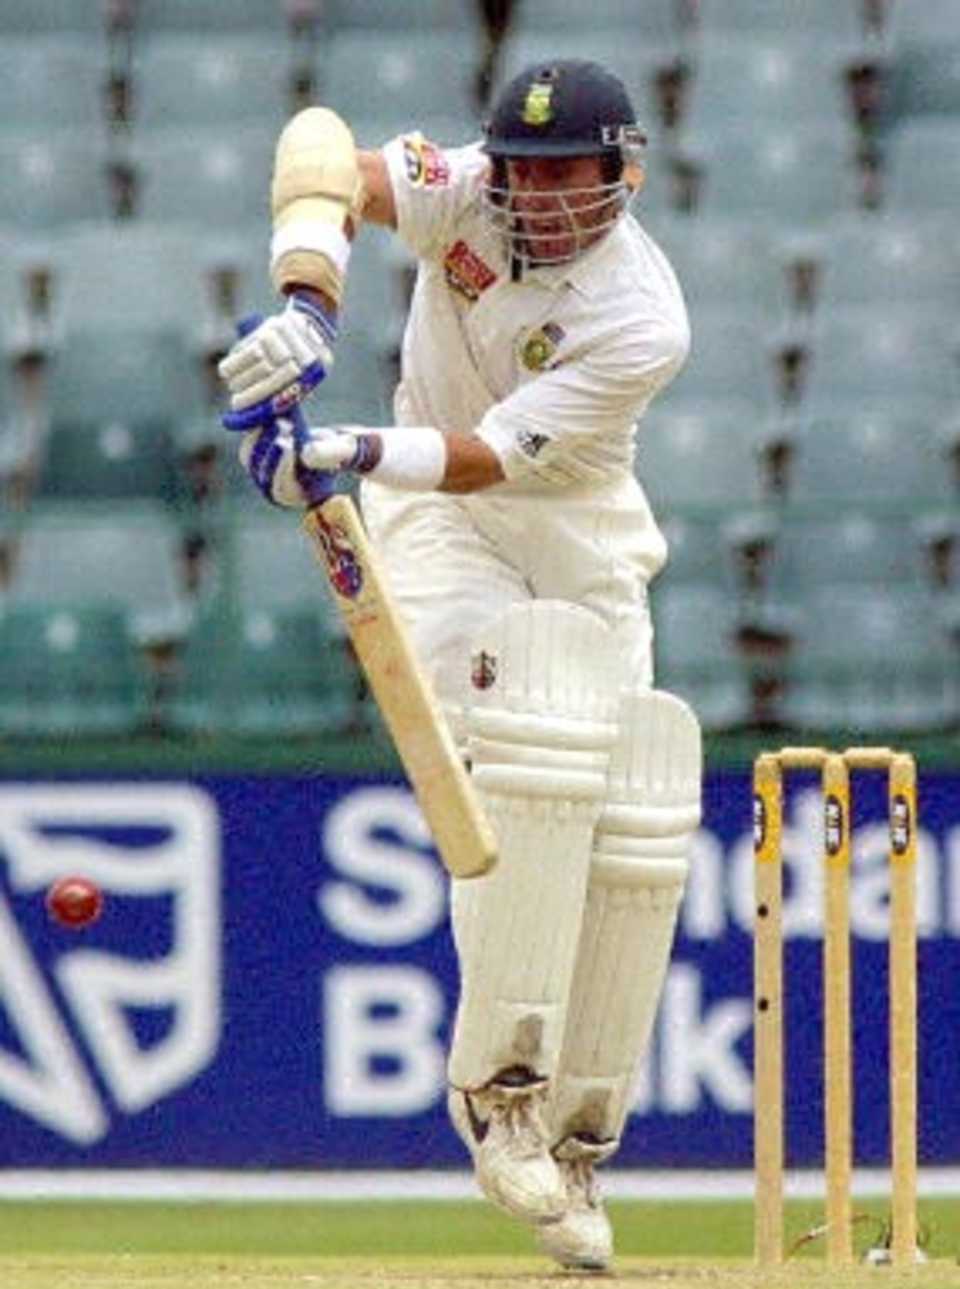 South African batsman Nicky Boje stops a fast ball 12 December 2000 during the 5th and final day of the third and final five day cricket Test between New Zealand and South Africa , at the Wanderers cricket ground in Johannesburg.